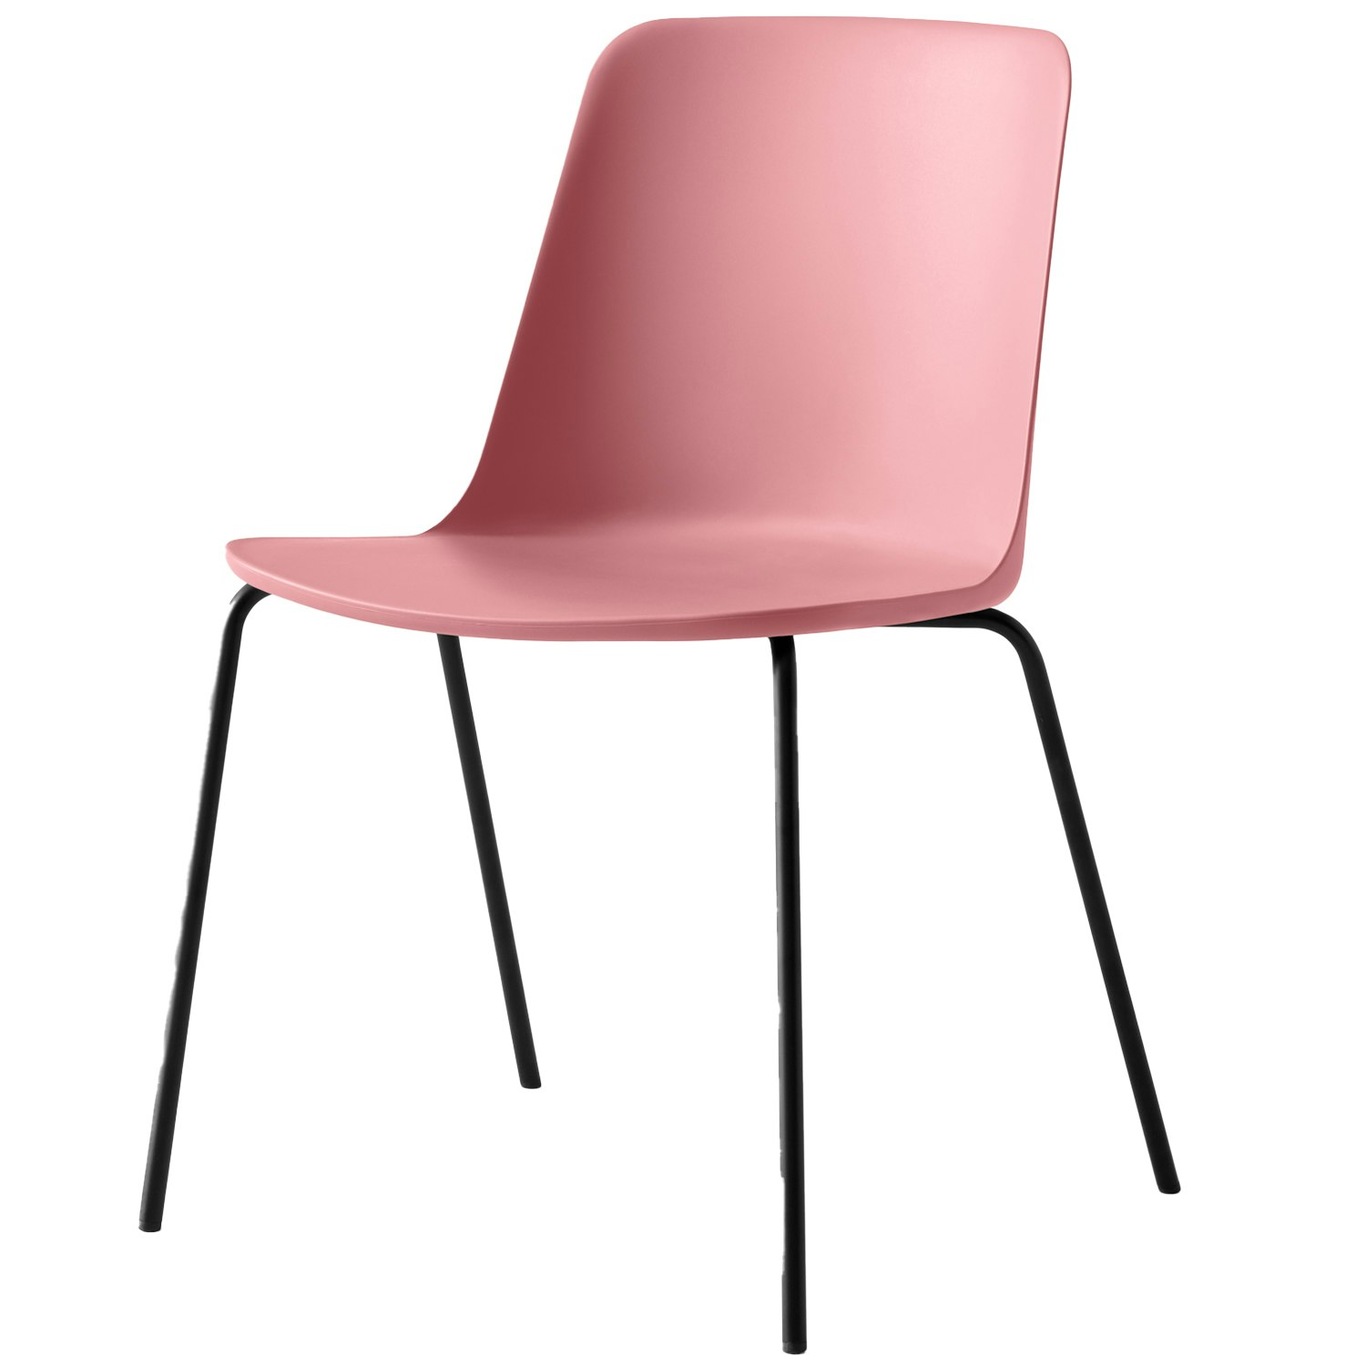 Rely Chair HW65, Soft Pink